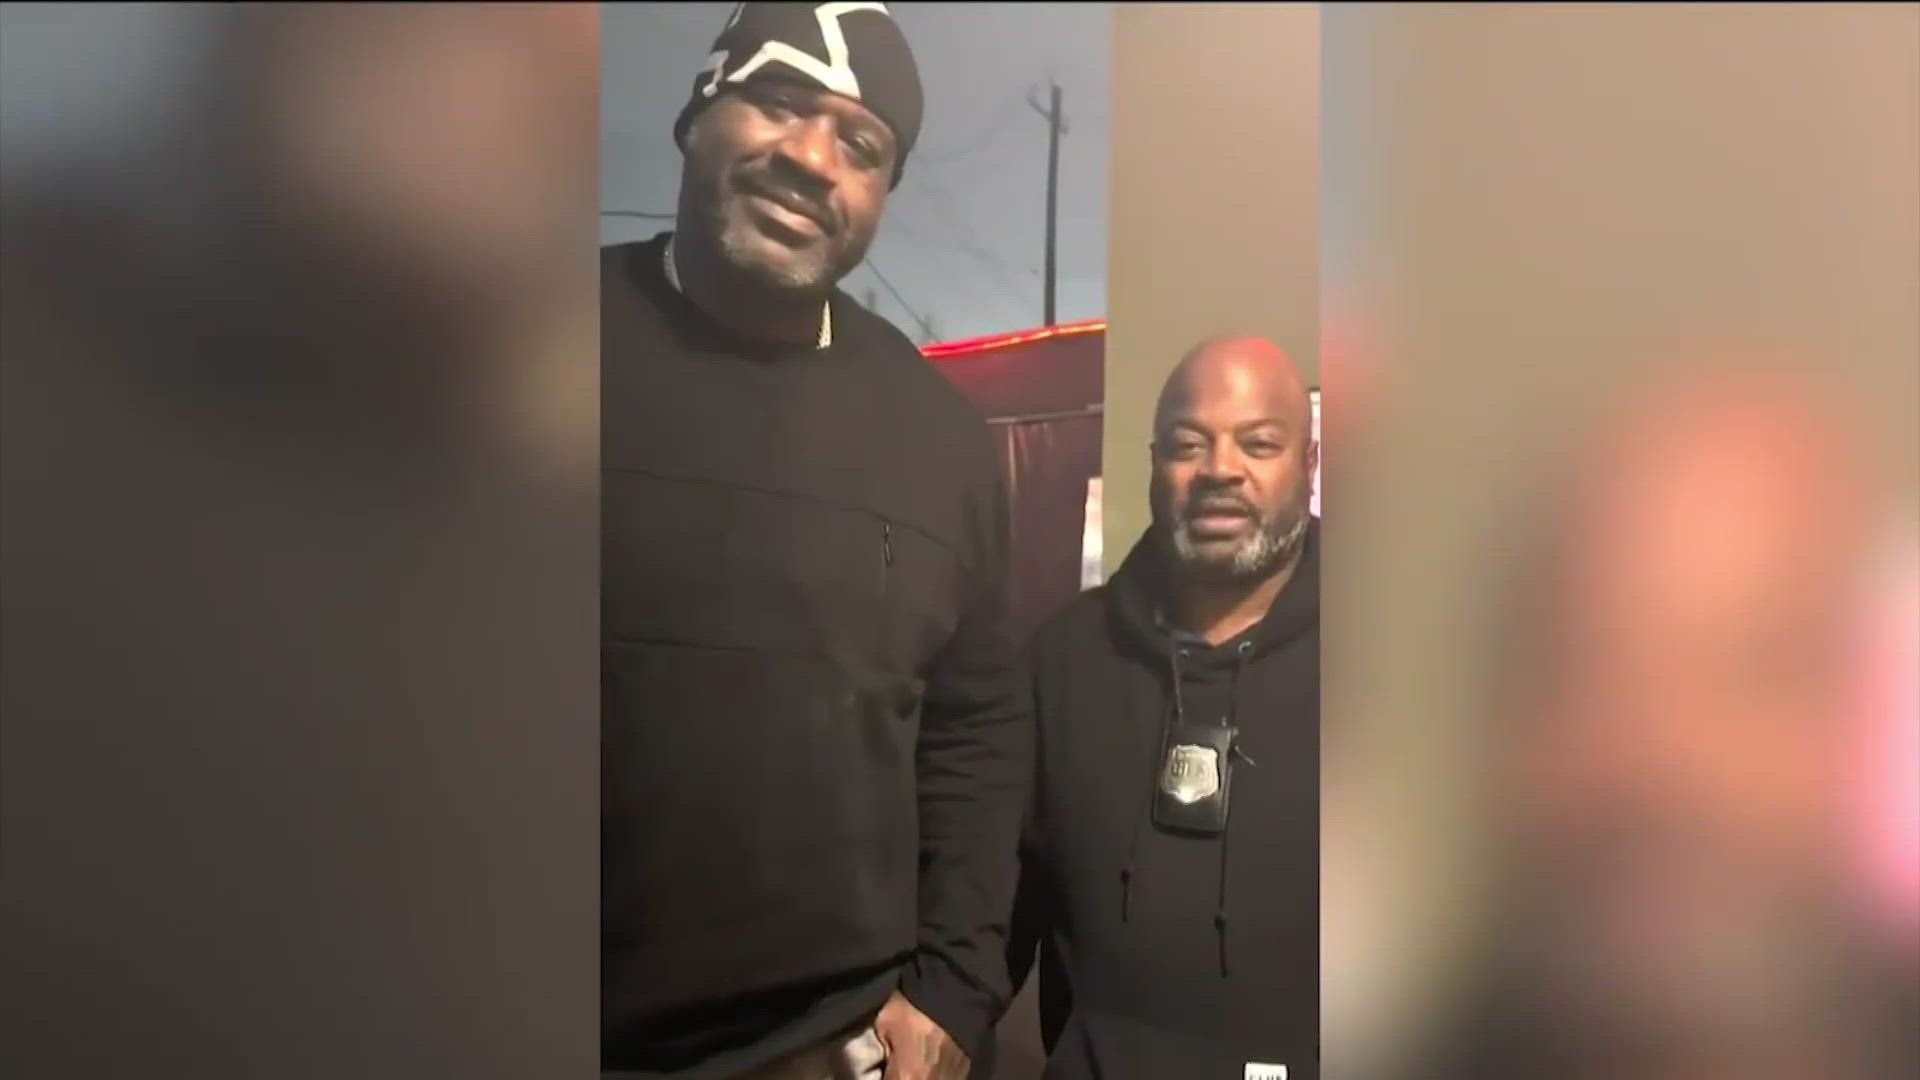 A Houston cop is getting his 15 minutes of fame after he pulled over a basketball legend.